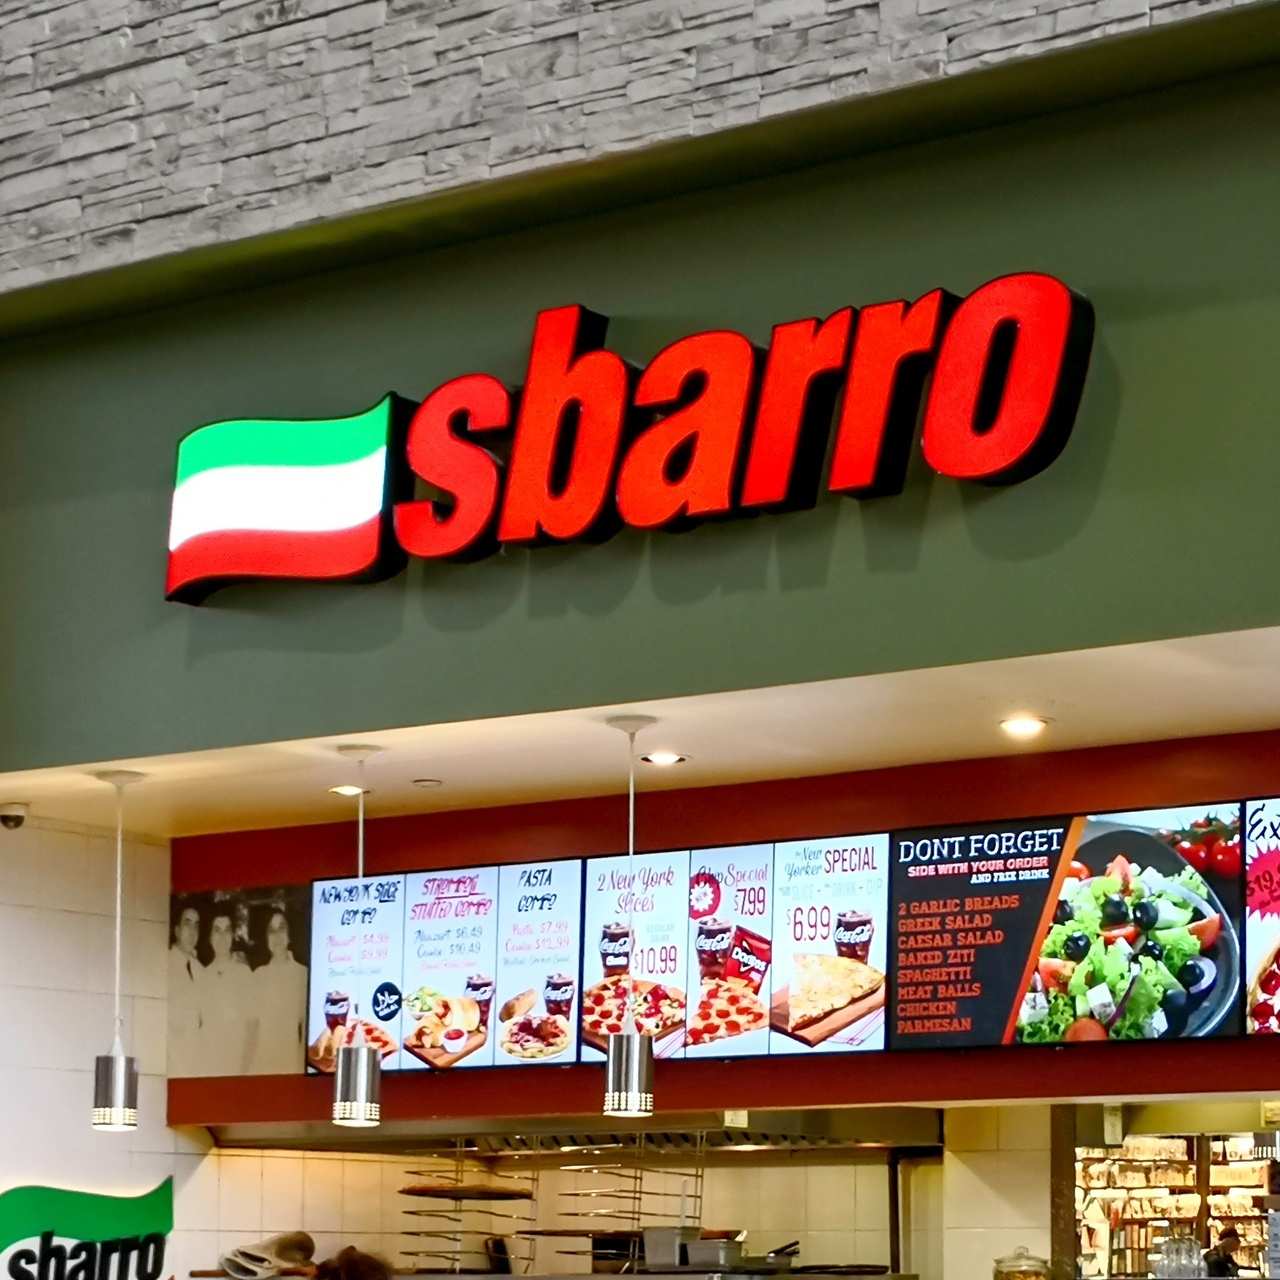 US pizzeria chain Sbarro enters the UK market - The Caterer